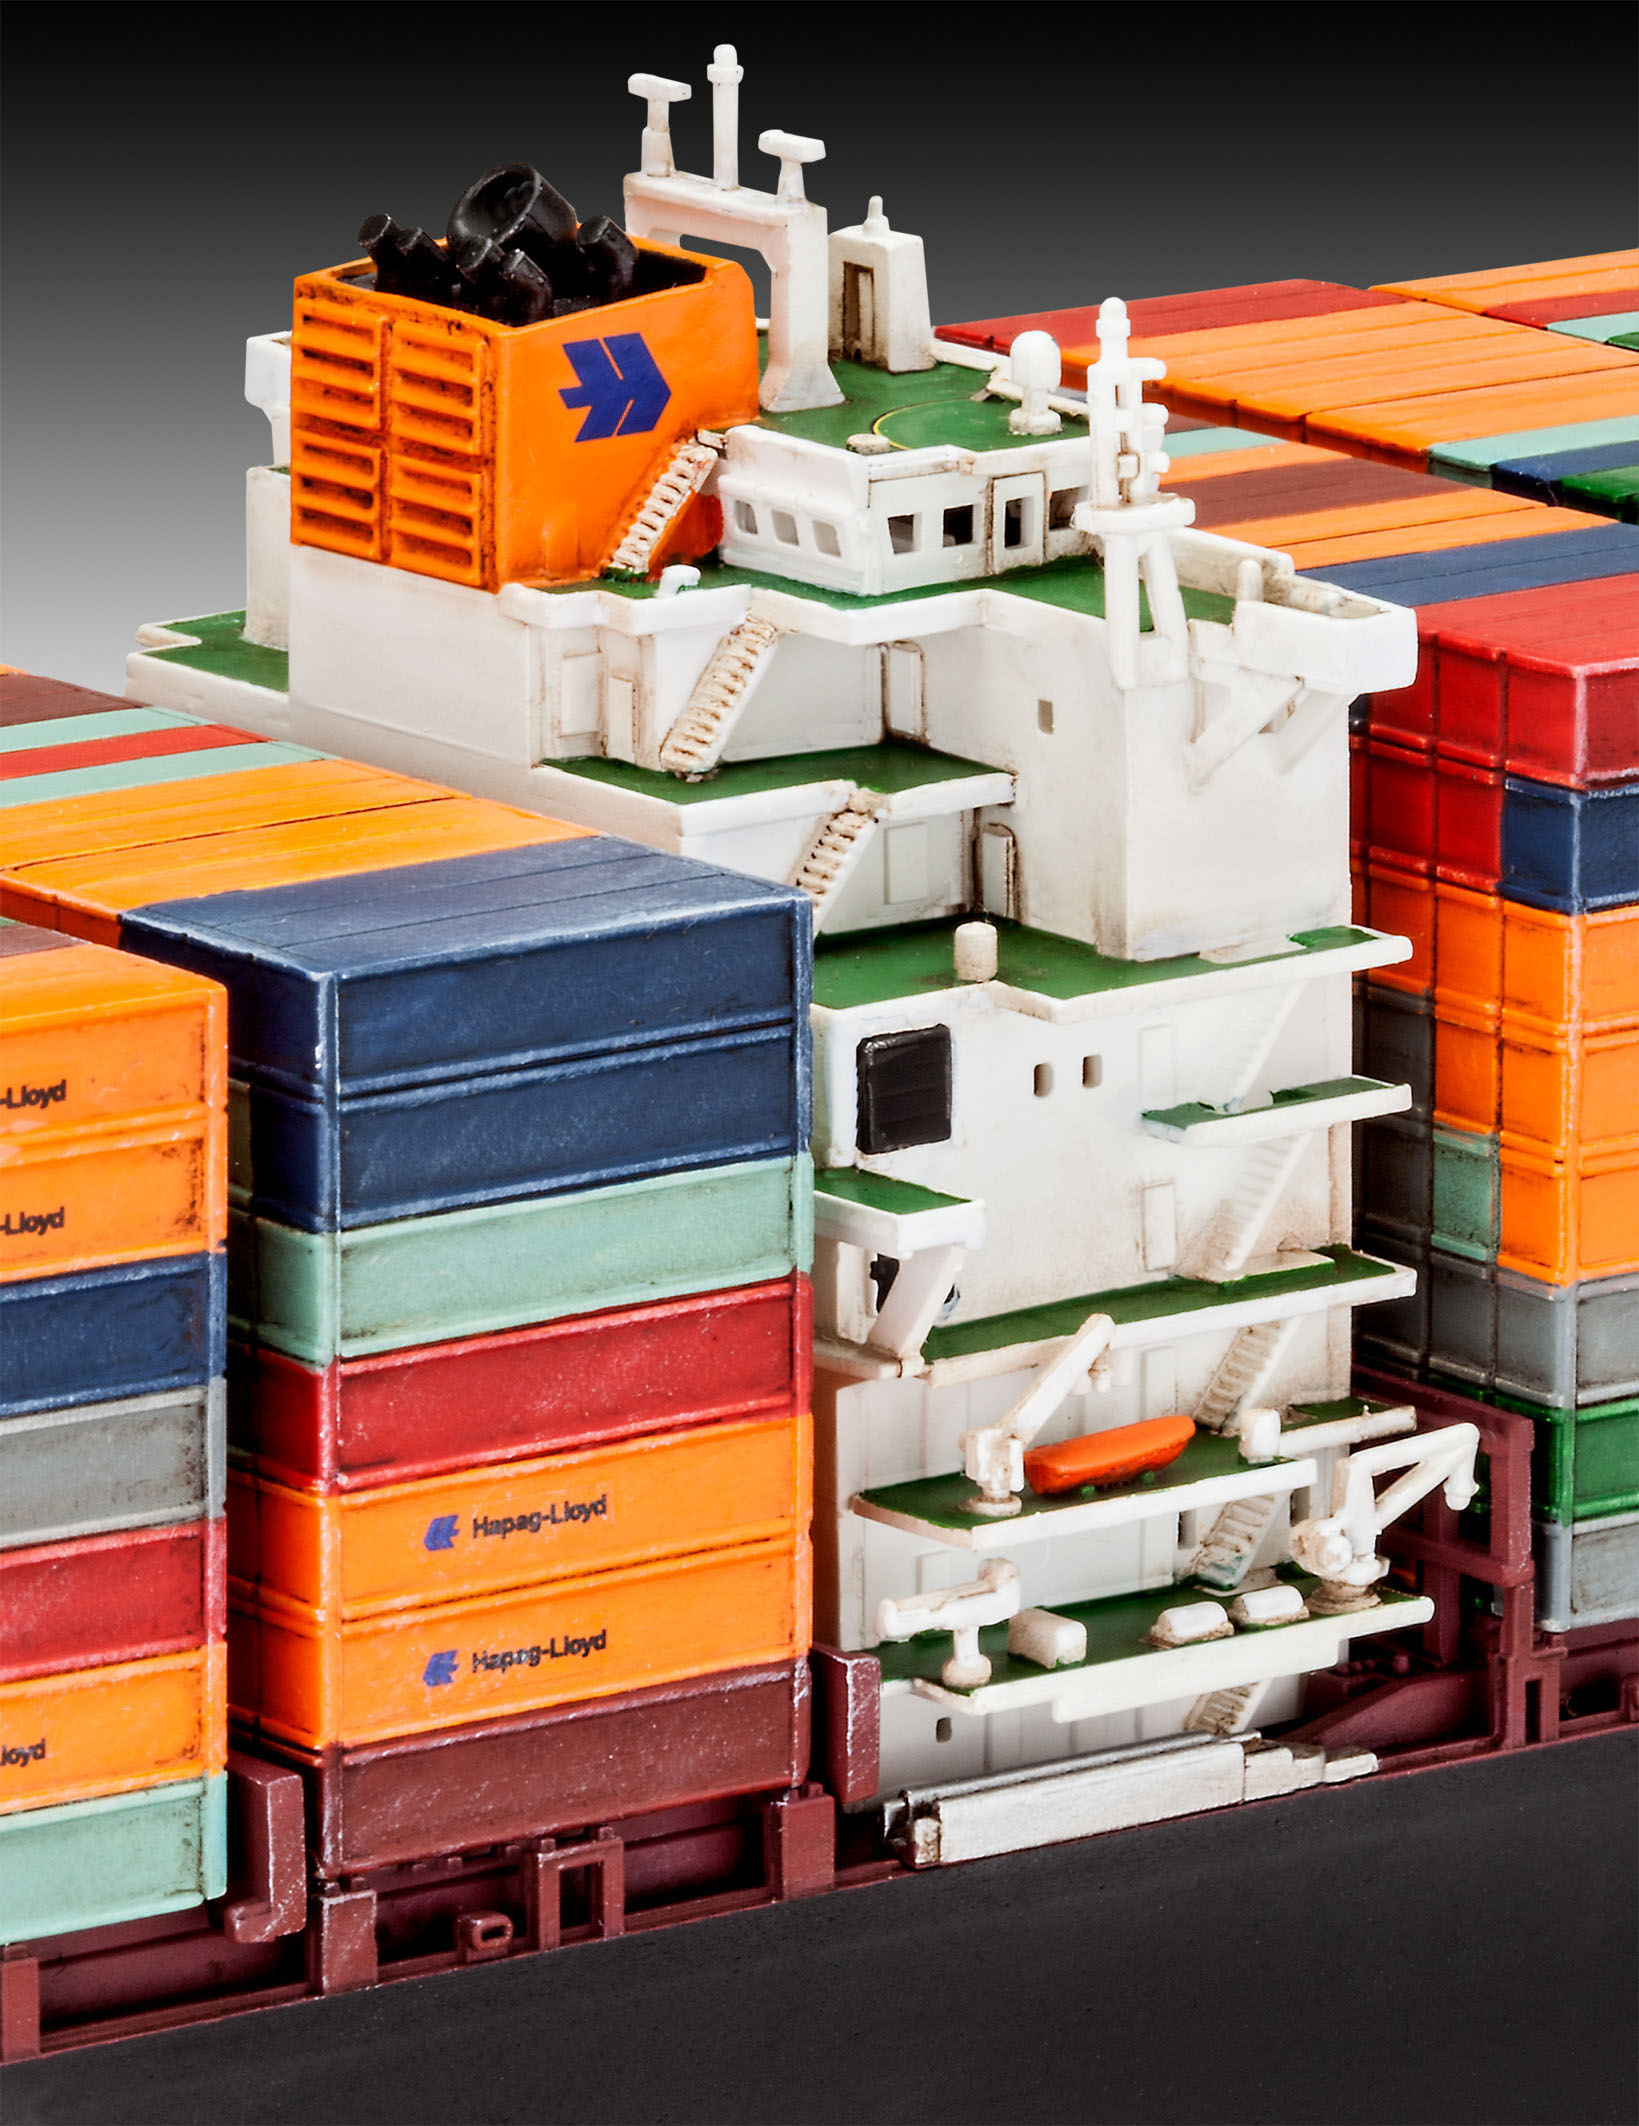 Express Modellbausatz, Ship Colombo REVELL Mehrfarbig Container